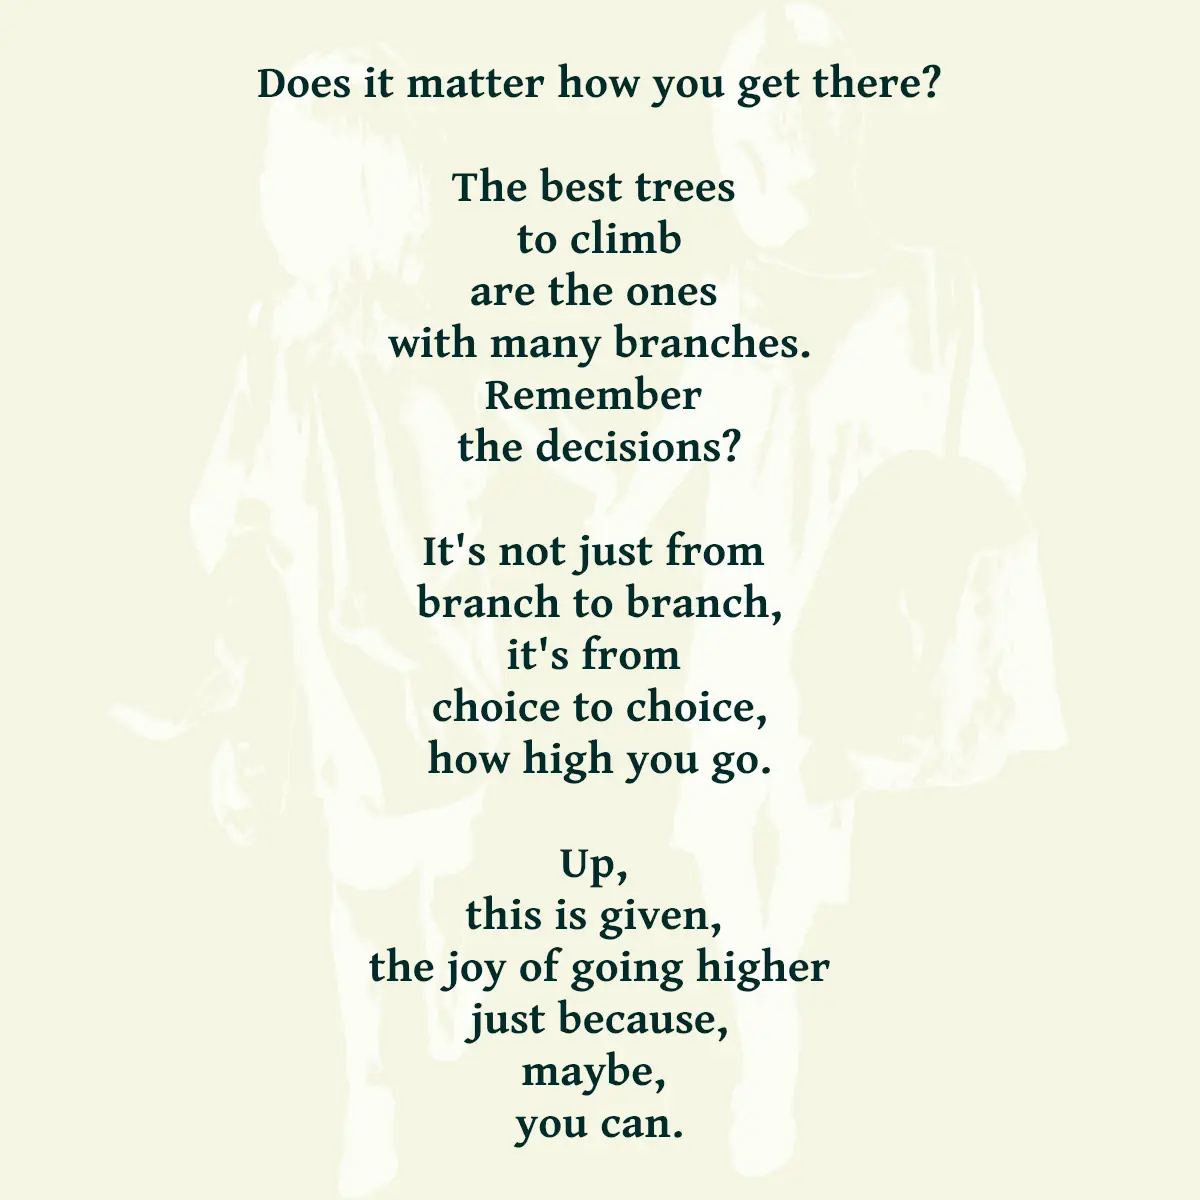 Does it matter how you get there? The best trees to climb are the ones with many branches. Remember the decisions? It's not just from branch to branch, it's from choice to choice, how high you go. Up, this is given, the joy of going higher just because, maybe, you can.